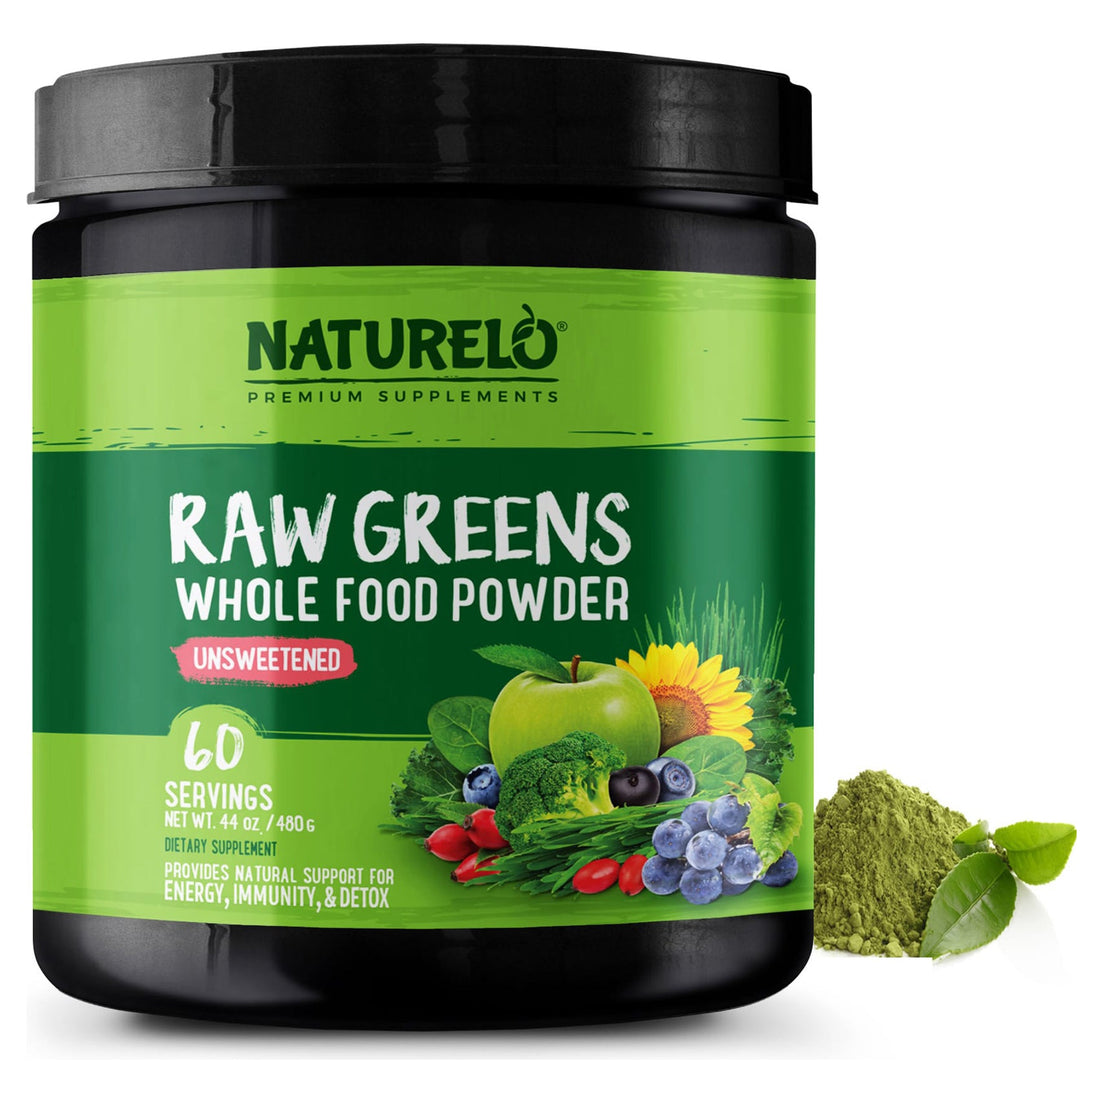 Amazing Grass Greens Blend Superfood: Super Greens Powder Smoothie Mix for  Boost Energy ,with Organic Spirulina, Chlorella, Beet Root Powder